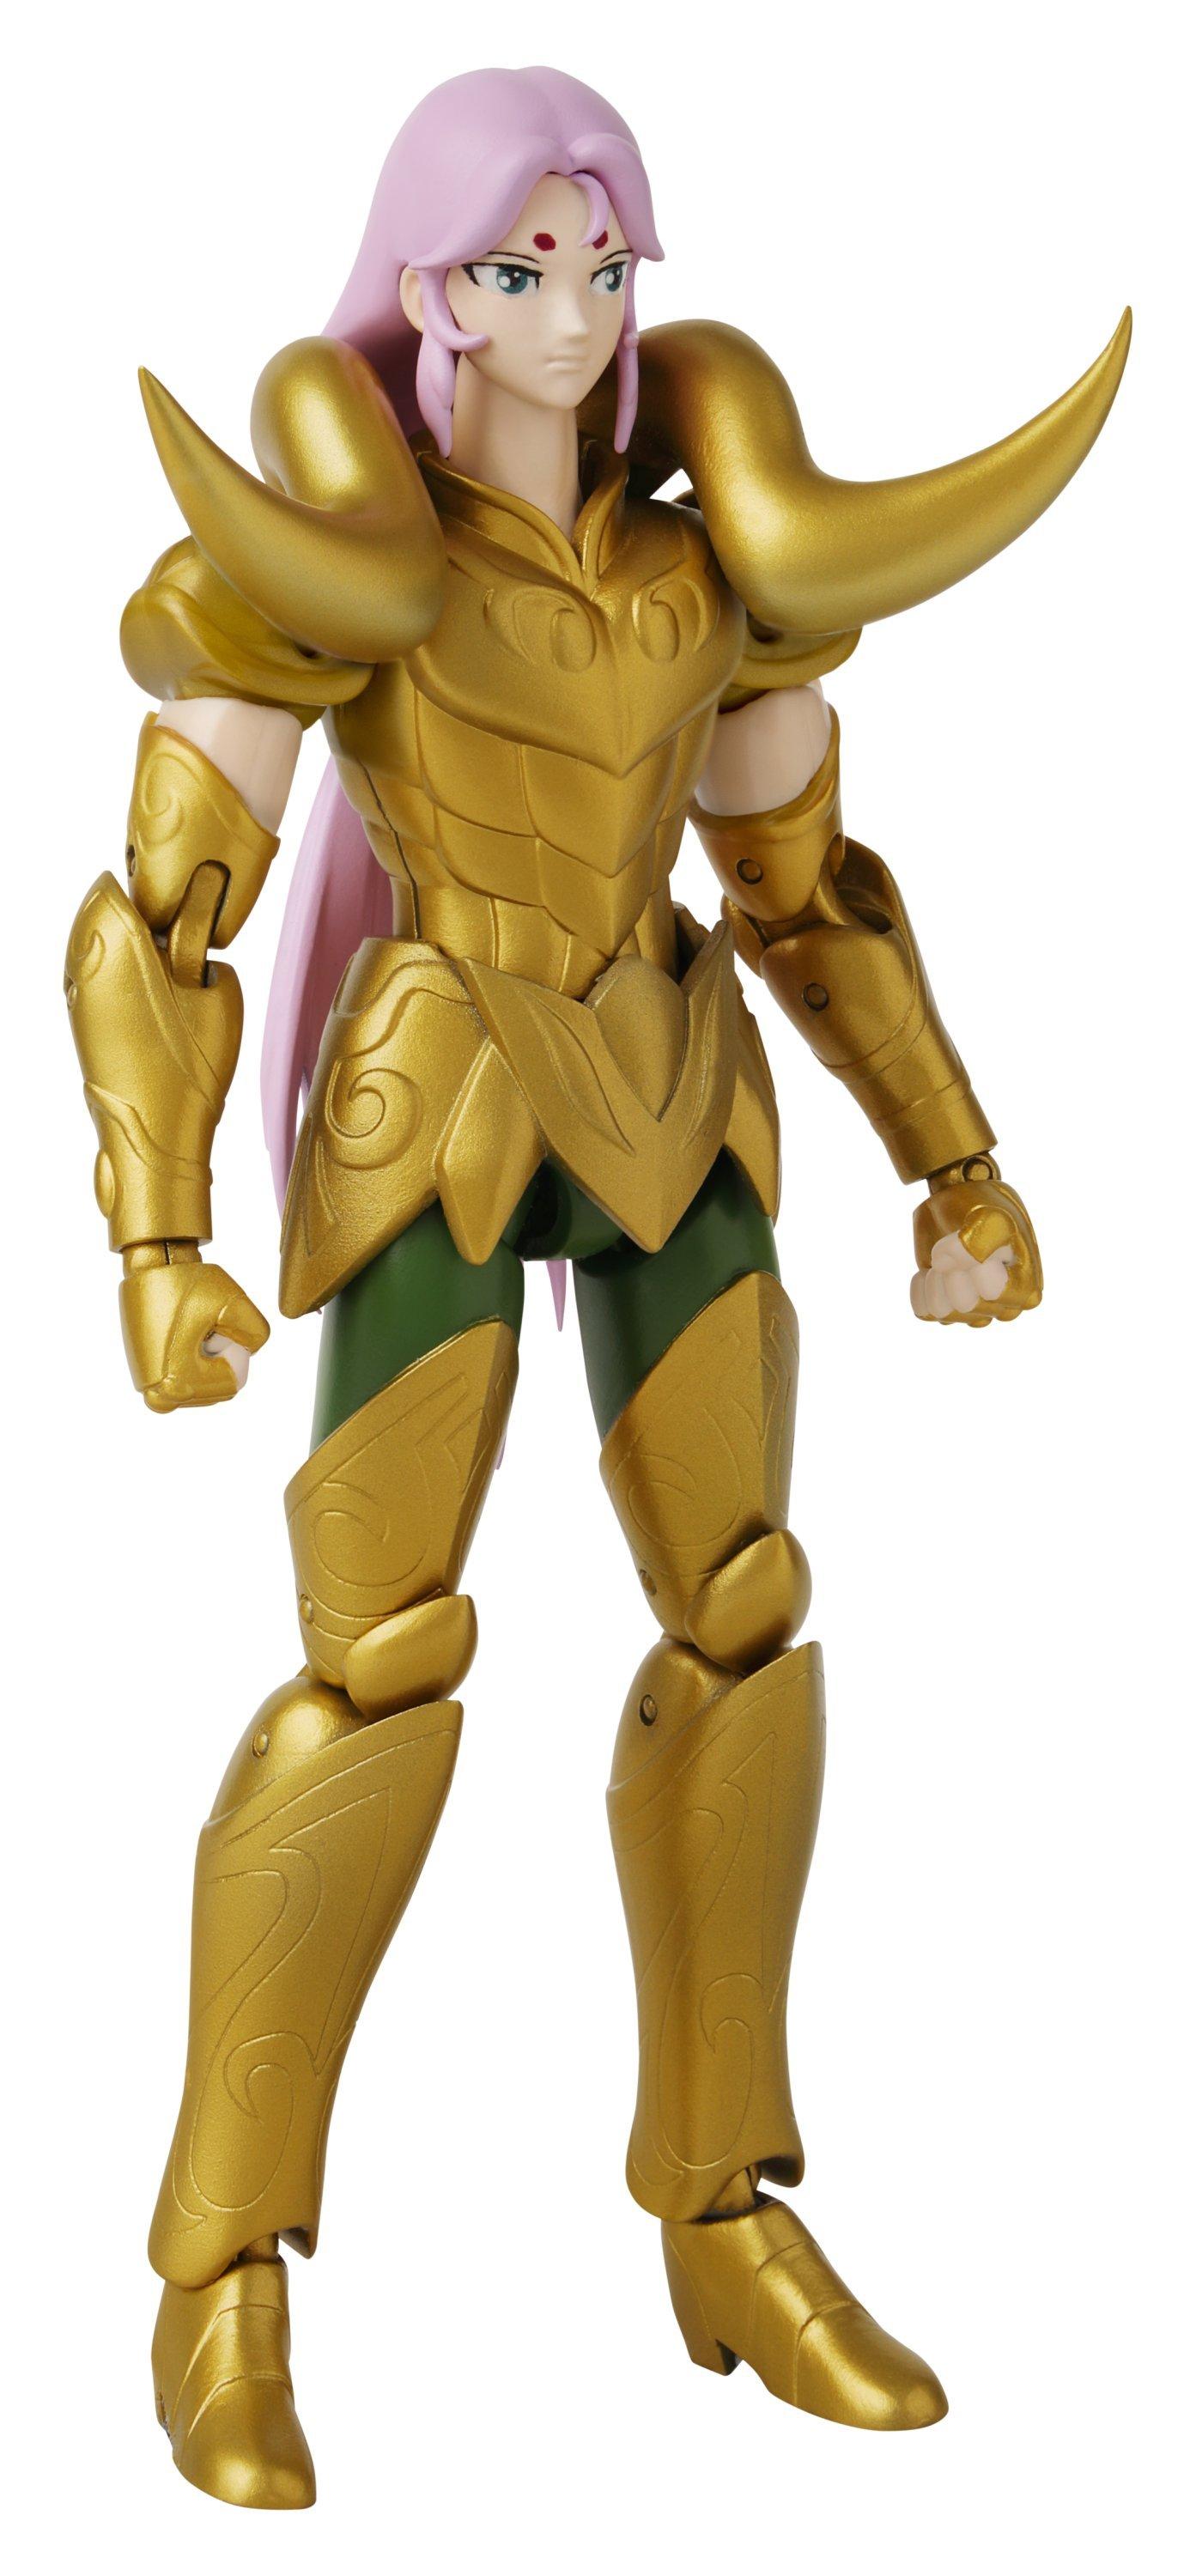 Knights of the Zodiac Anime Heroes Aries Mu Aiolos Action Figure